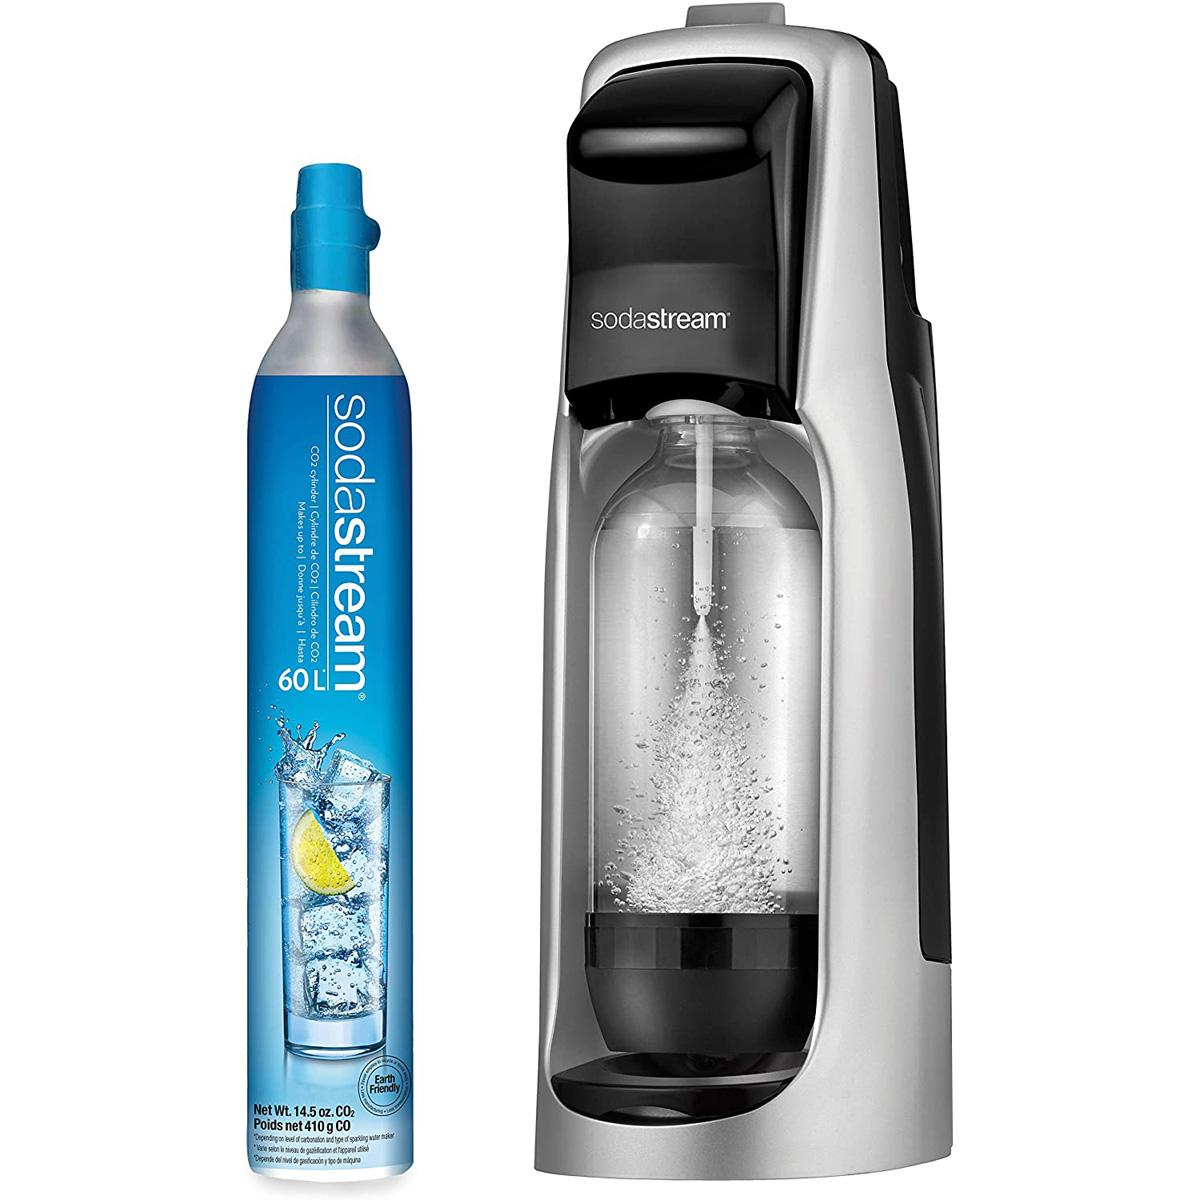 SodaStream 60L Jet Sparkling Water Maker for $59.99 Shipped